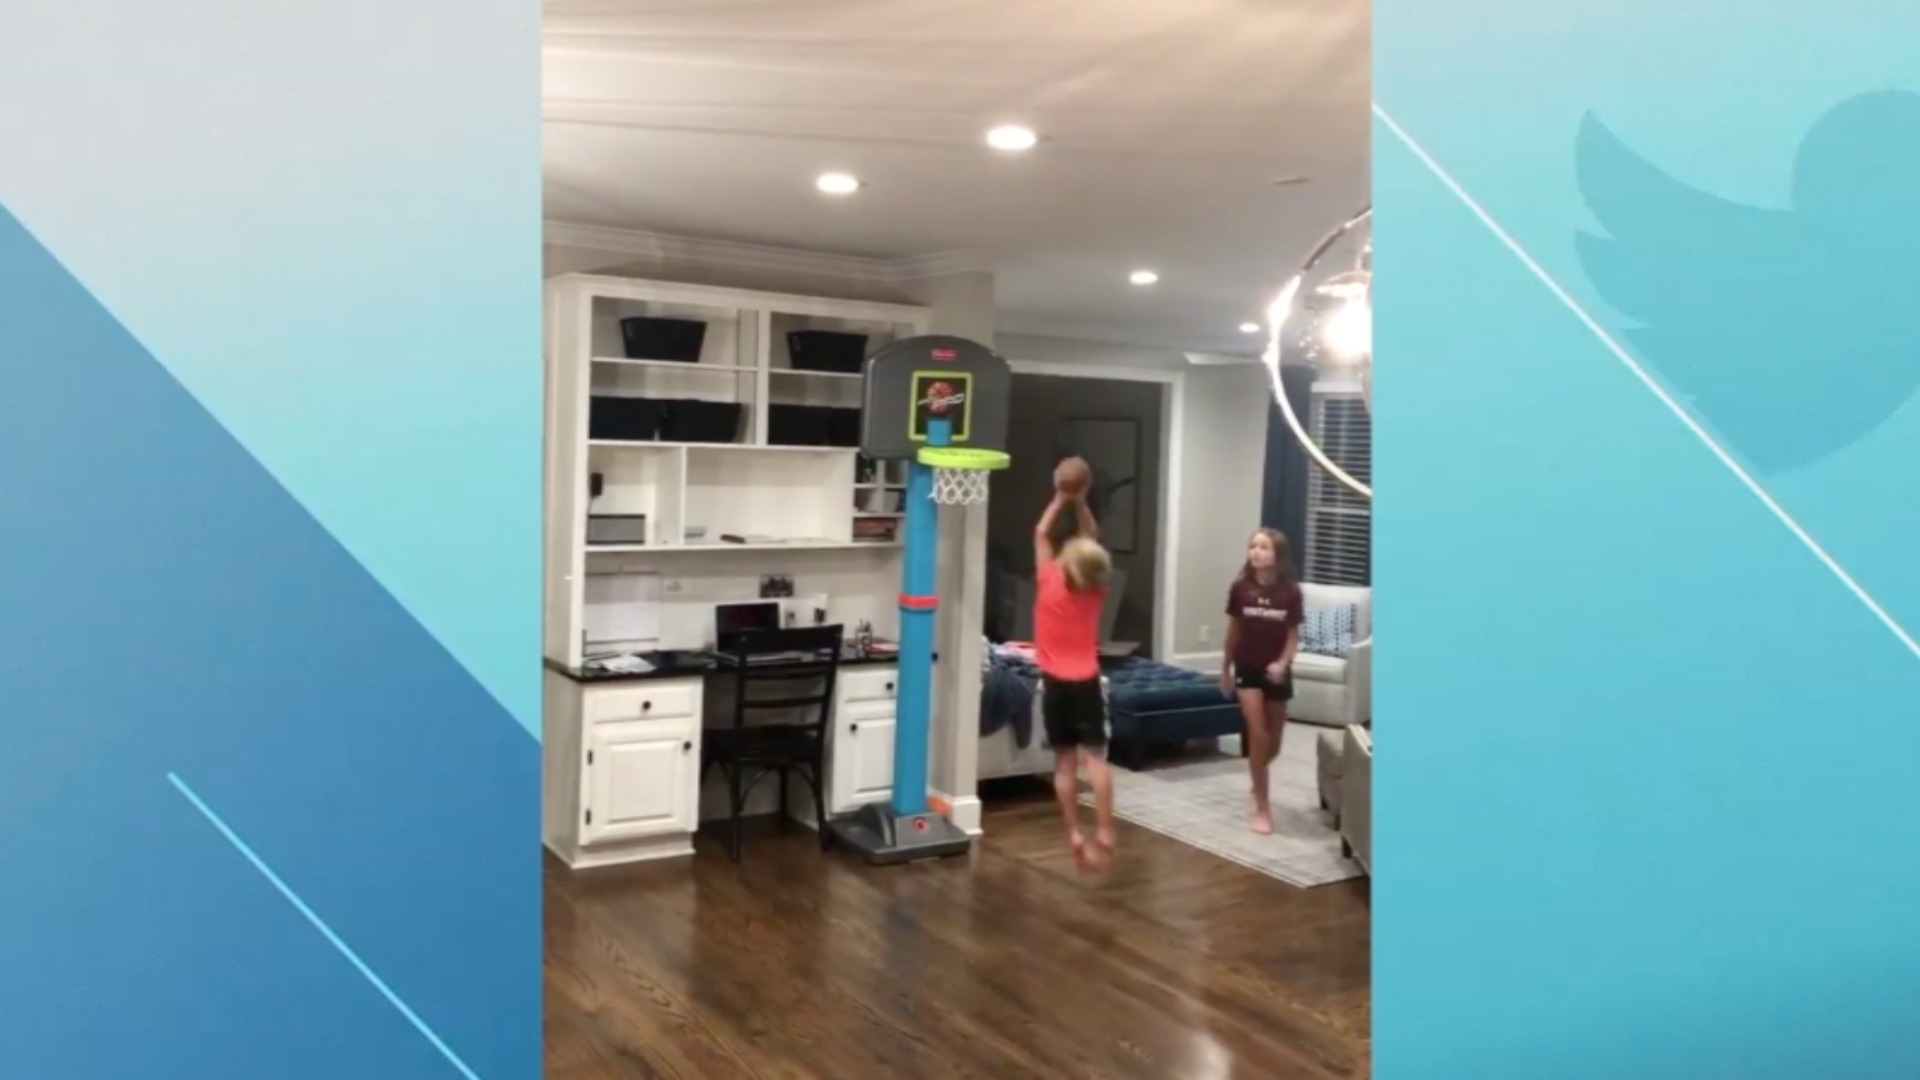 Winthrop's coach runs some drills in the kitchen with his family